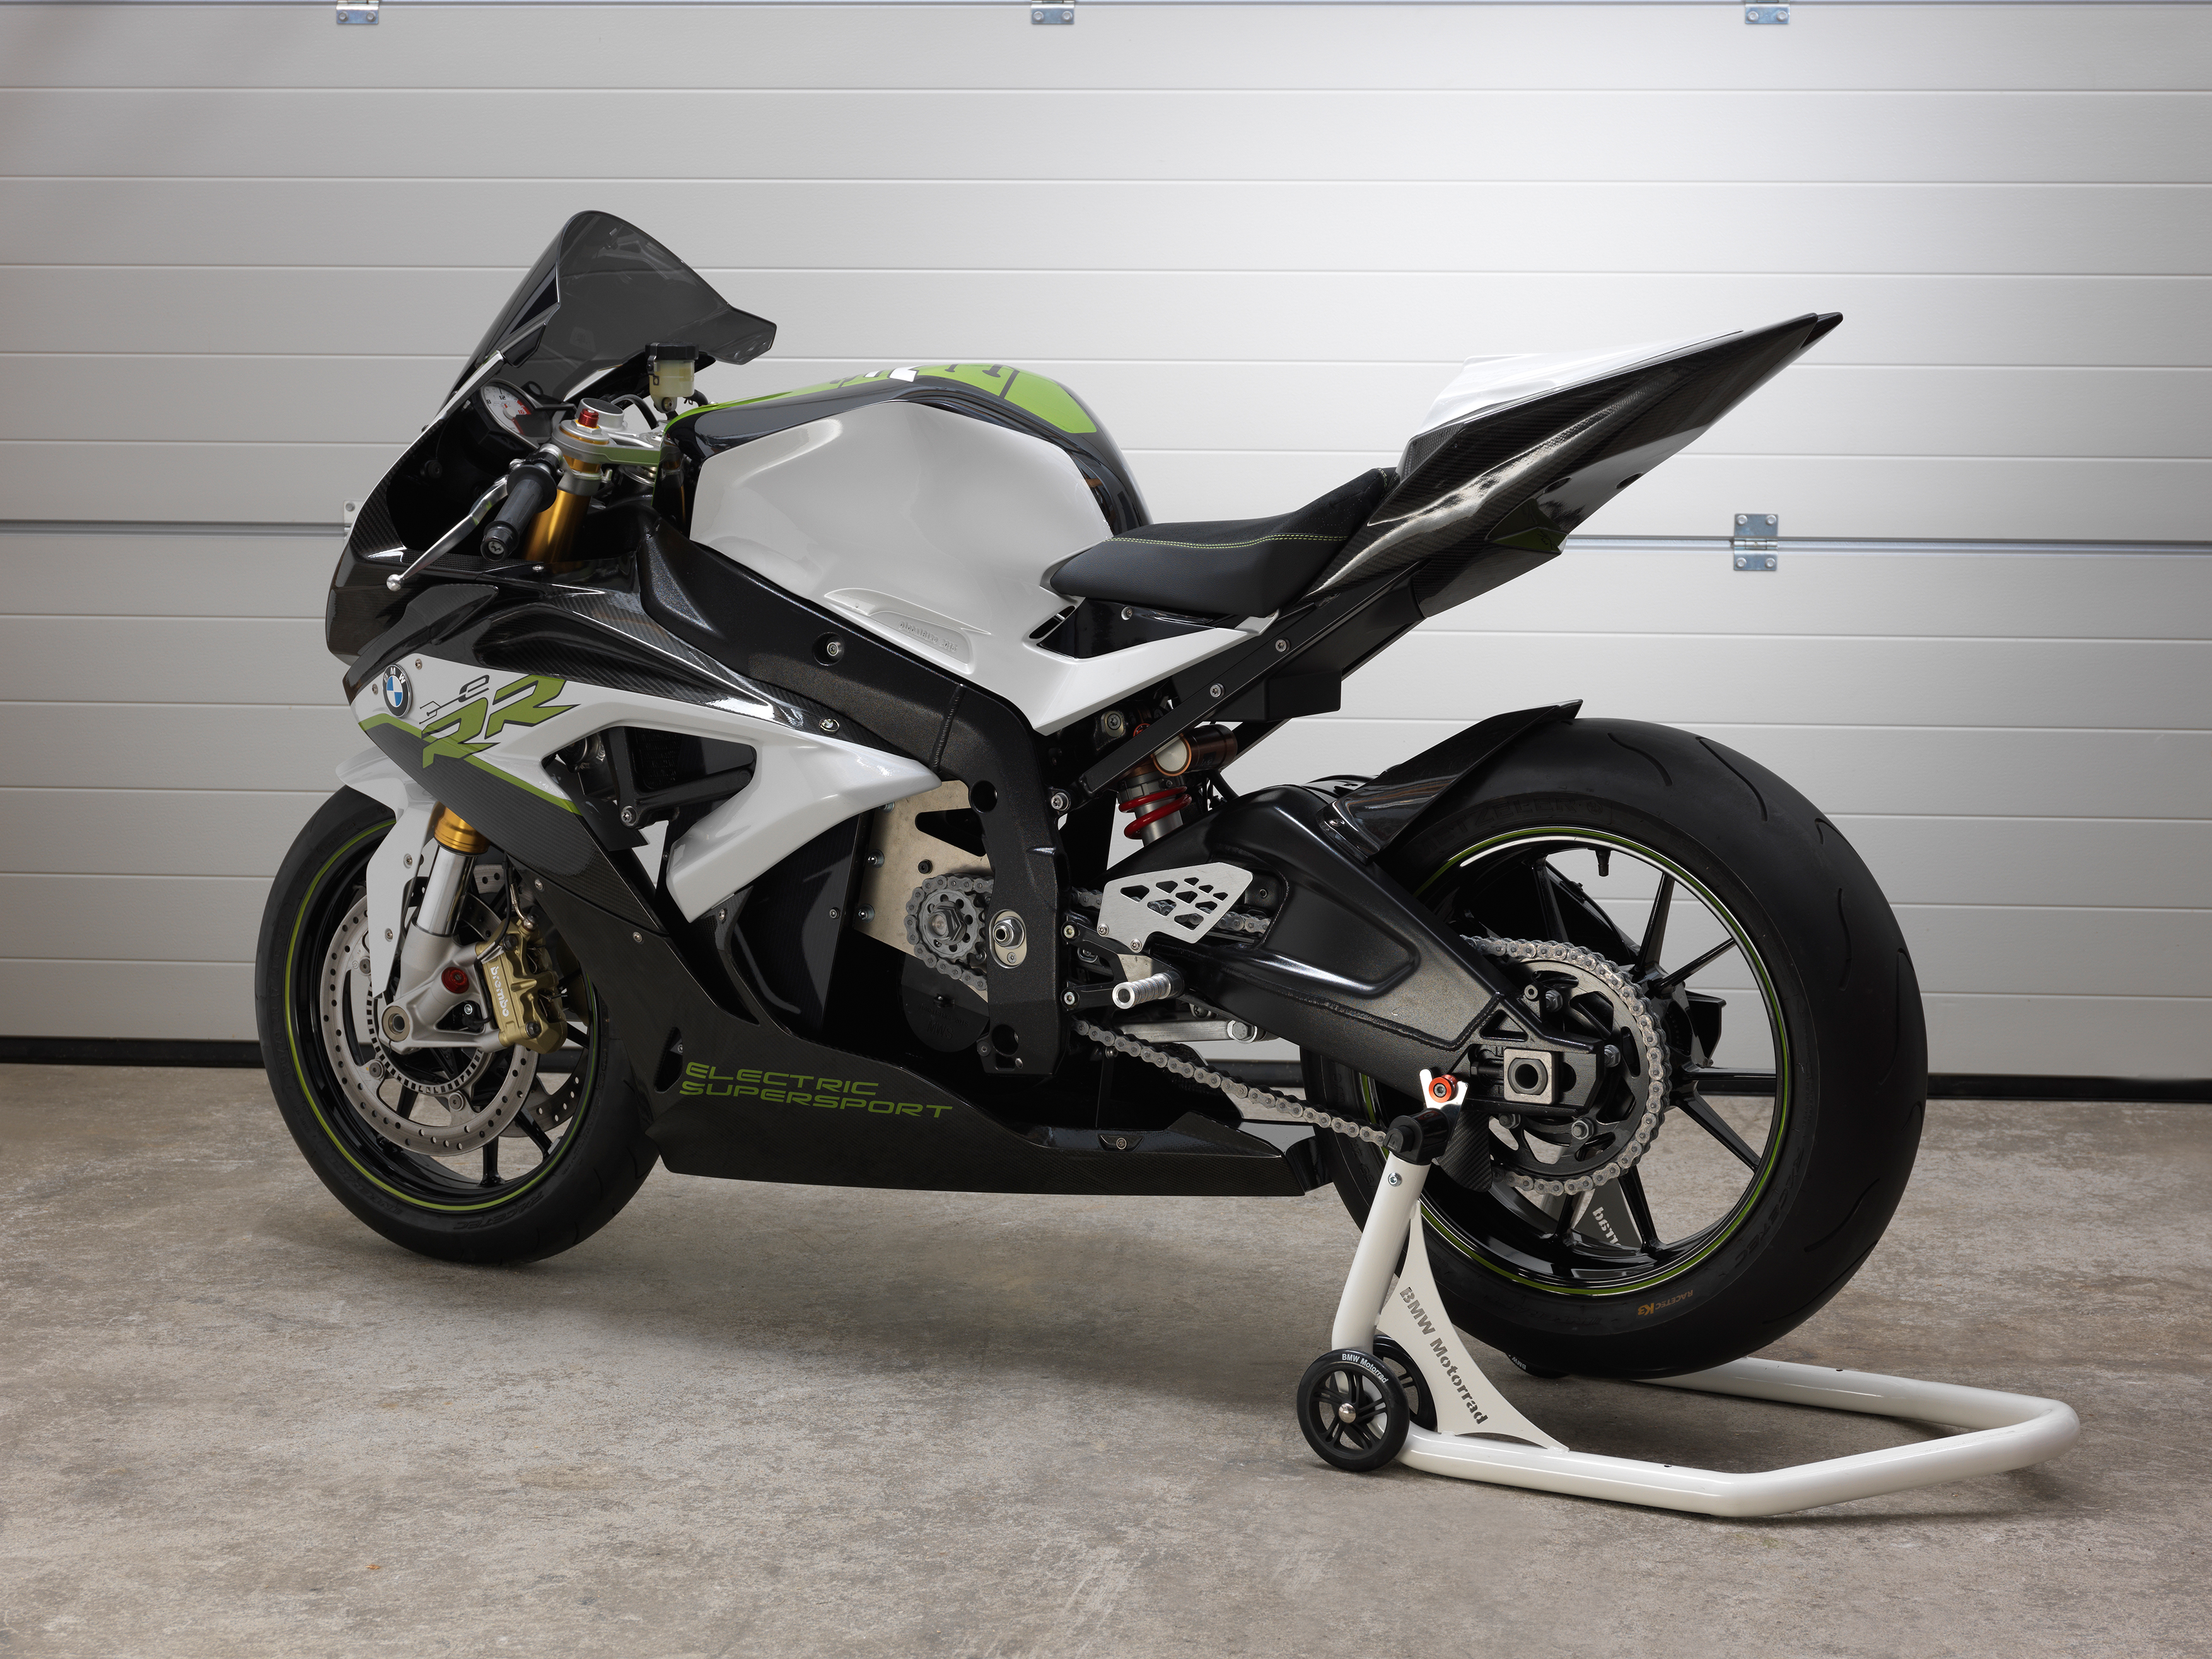 BMW's electric S1000RR revealed